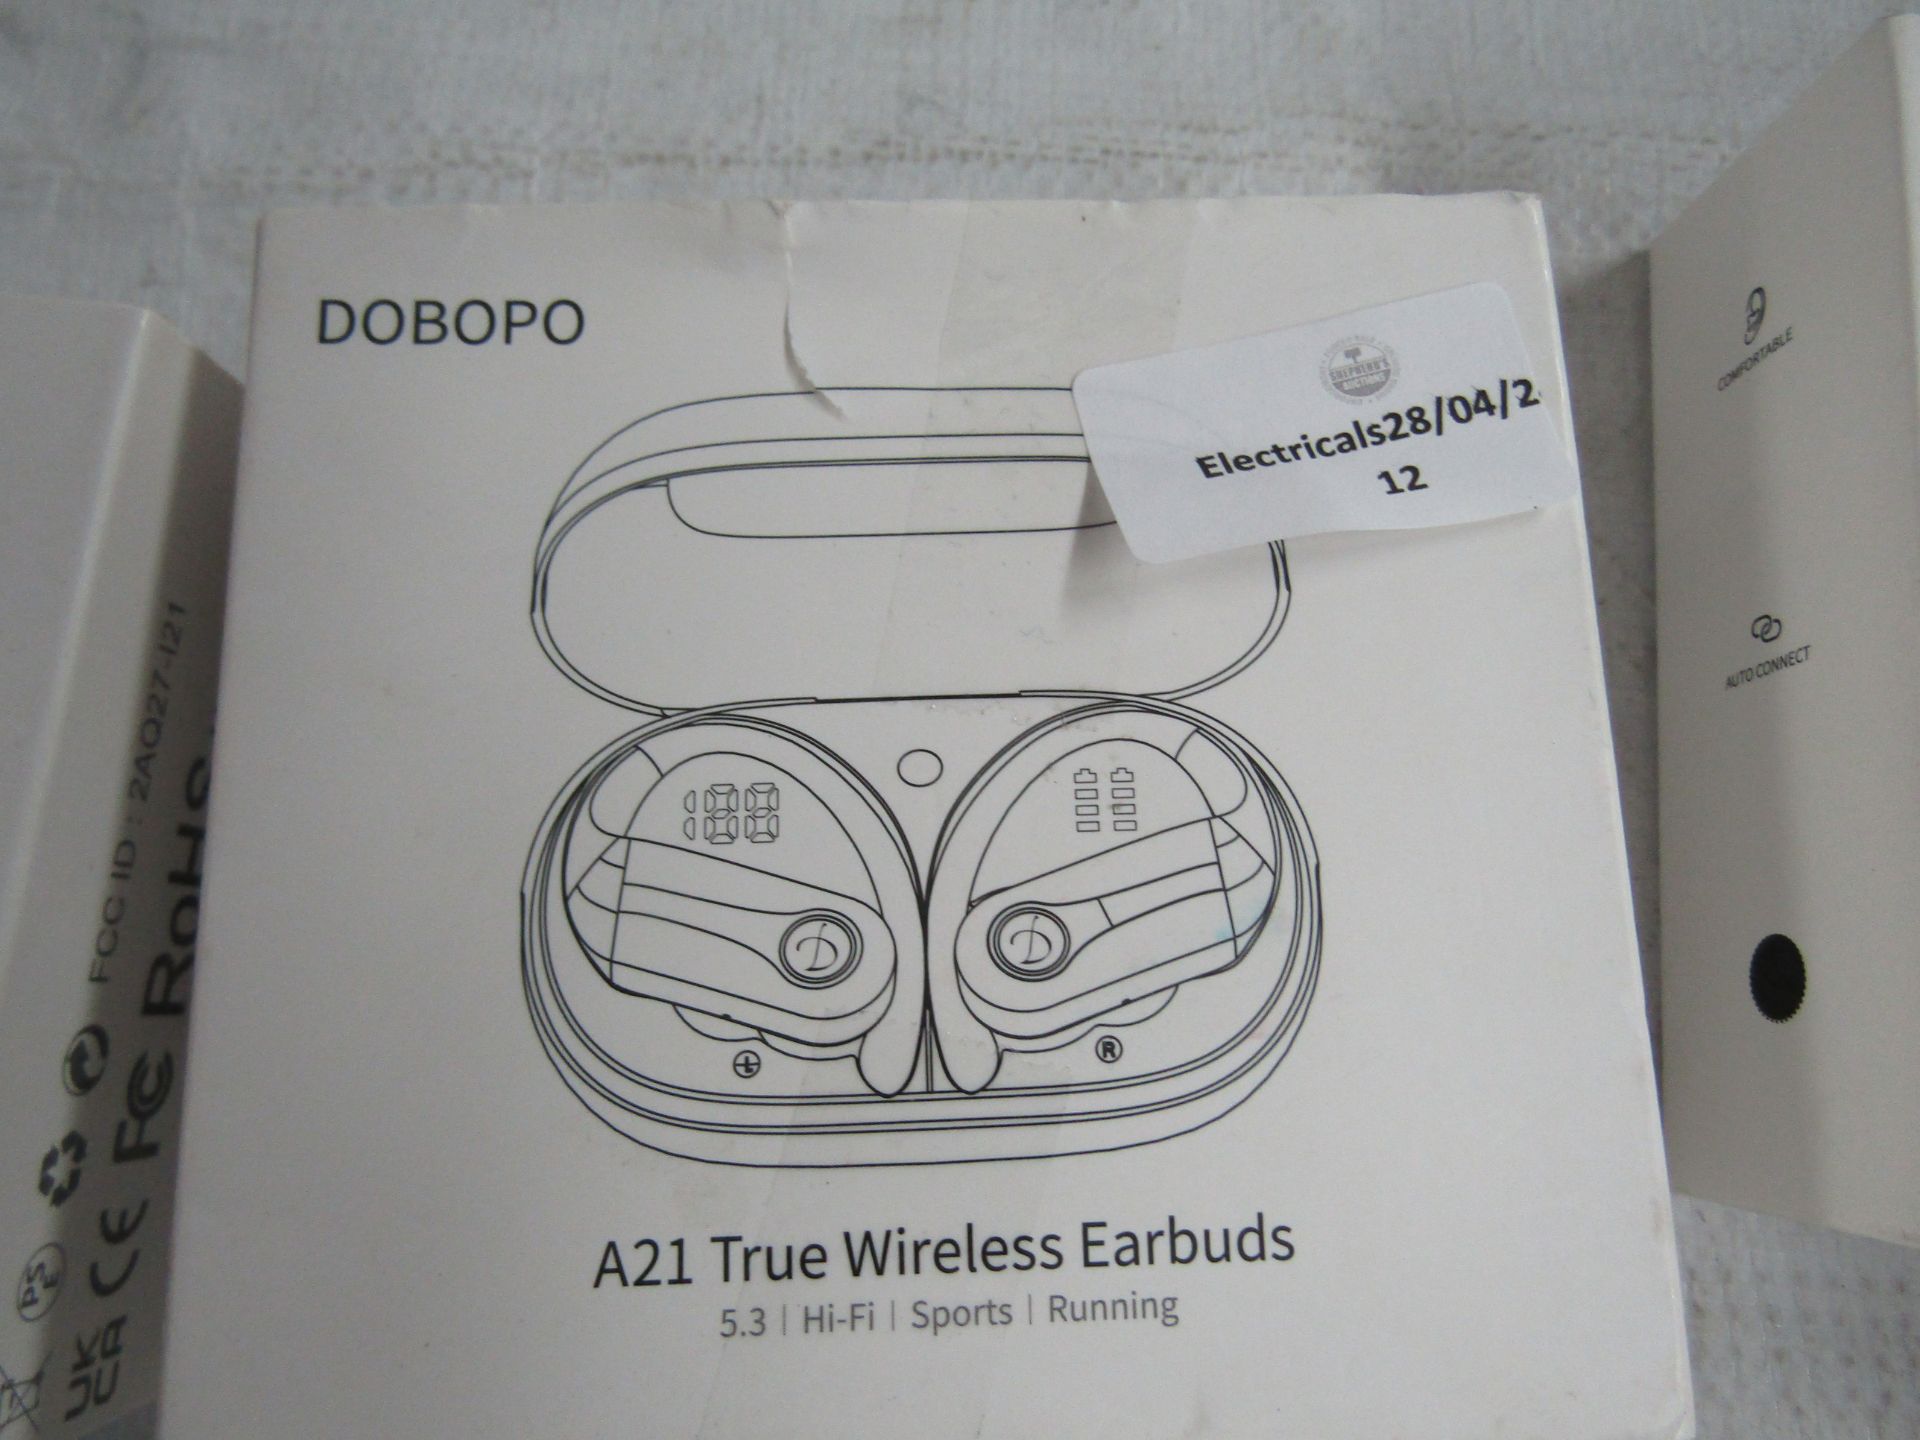 DOBOPO A21 True Wireless Earbuds - Unchecked & Boxed.